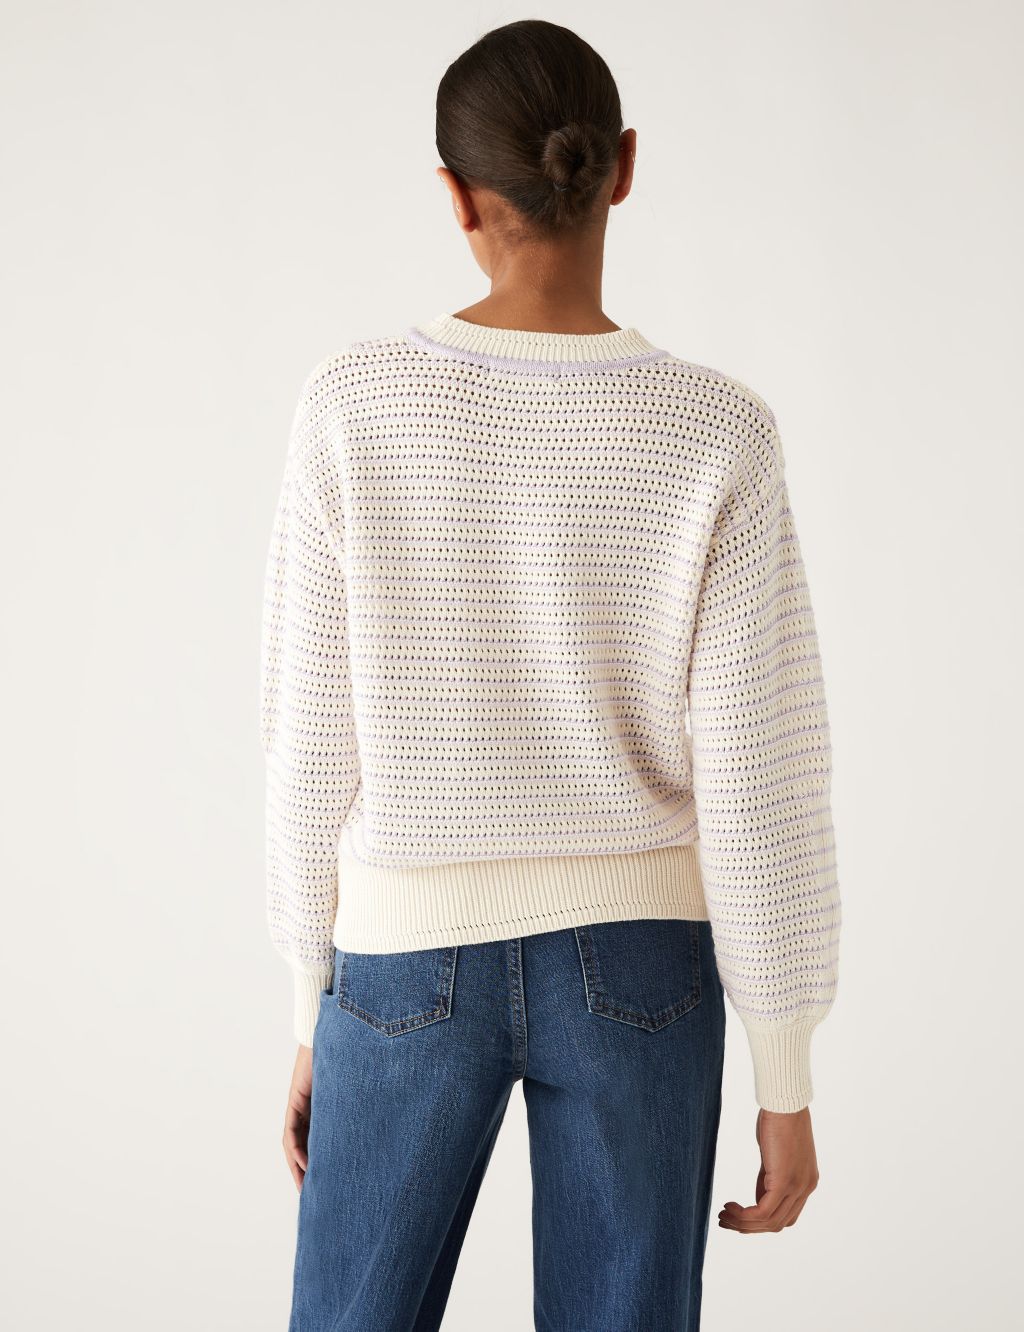 Cotton Rich Striped Relaxed Jumper image 4